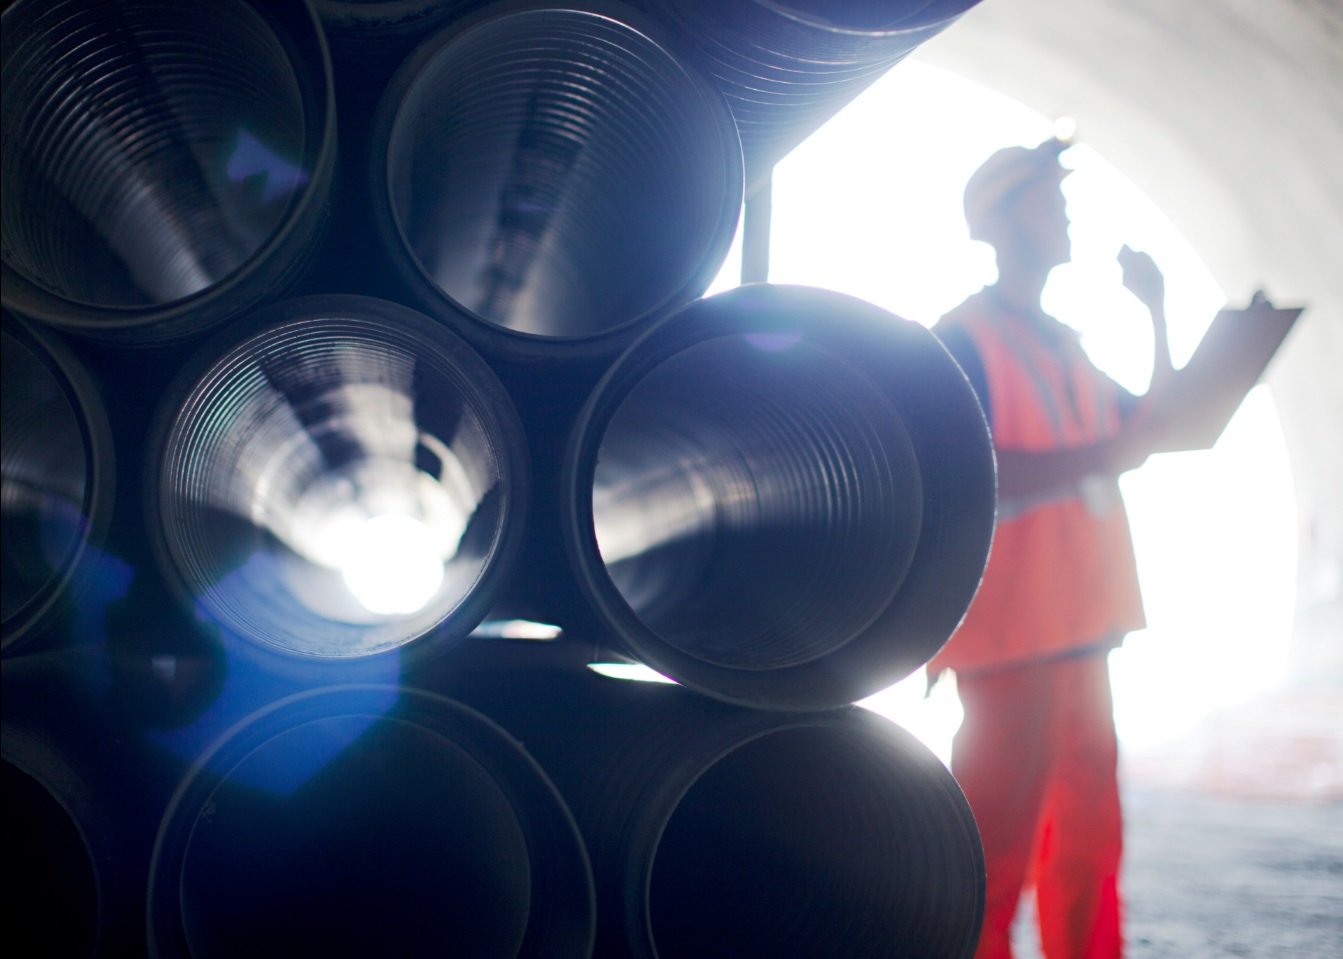 Man standing next to pipes